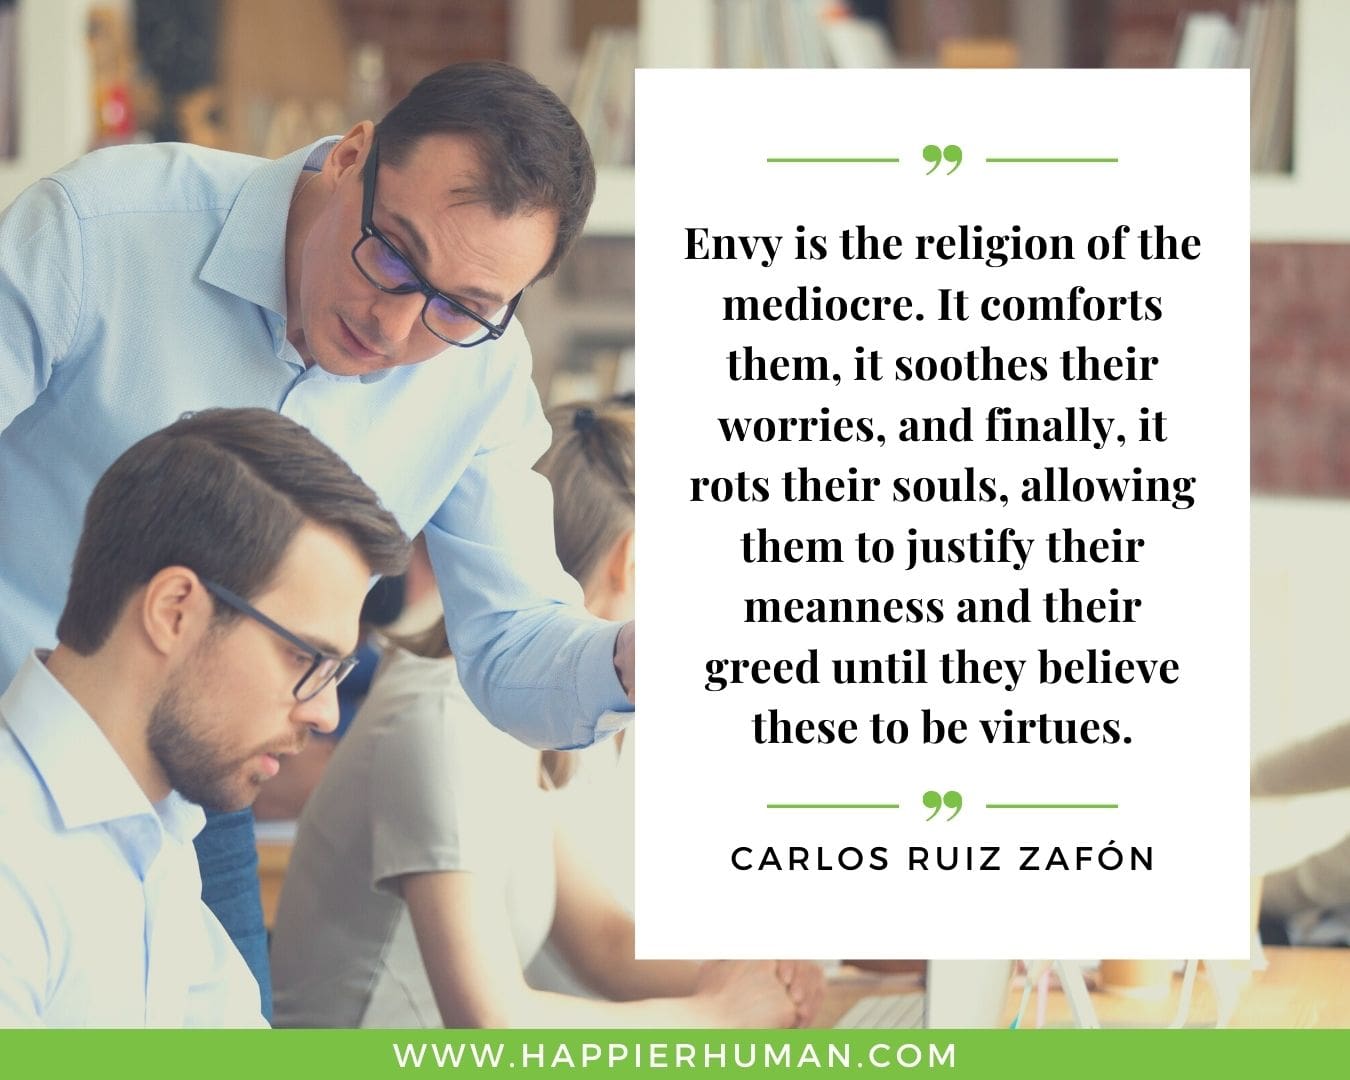 Haters Quotes - “Envy is the religion of the mediocre. It comforts them, it soothes their worries, and finally, it rots their souls, allowing them to justify their meanness and their greed until they believe these to be virtues.“ - Carlos Ruiz Zafón